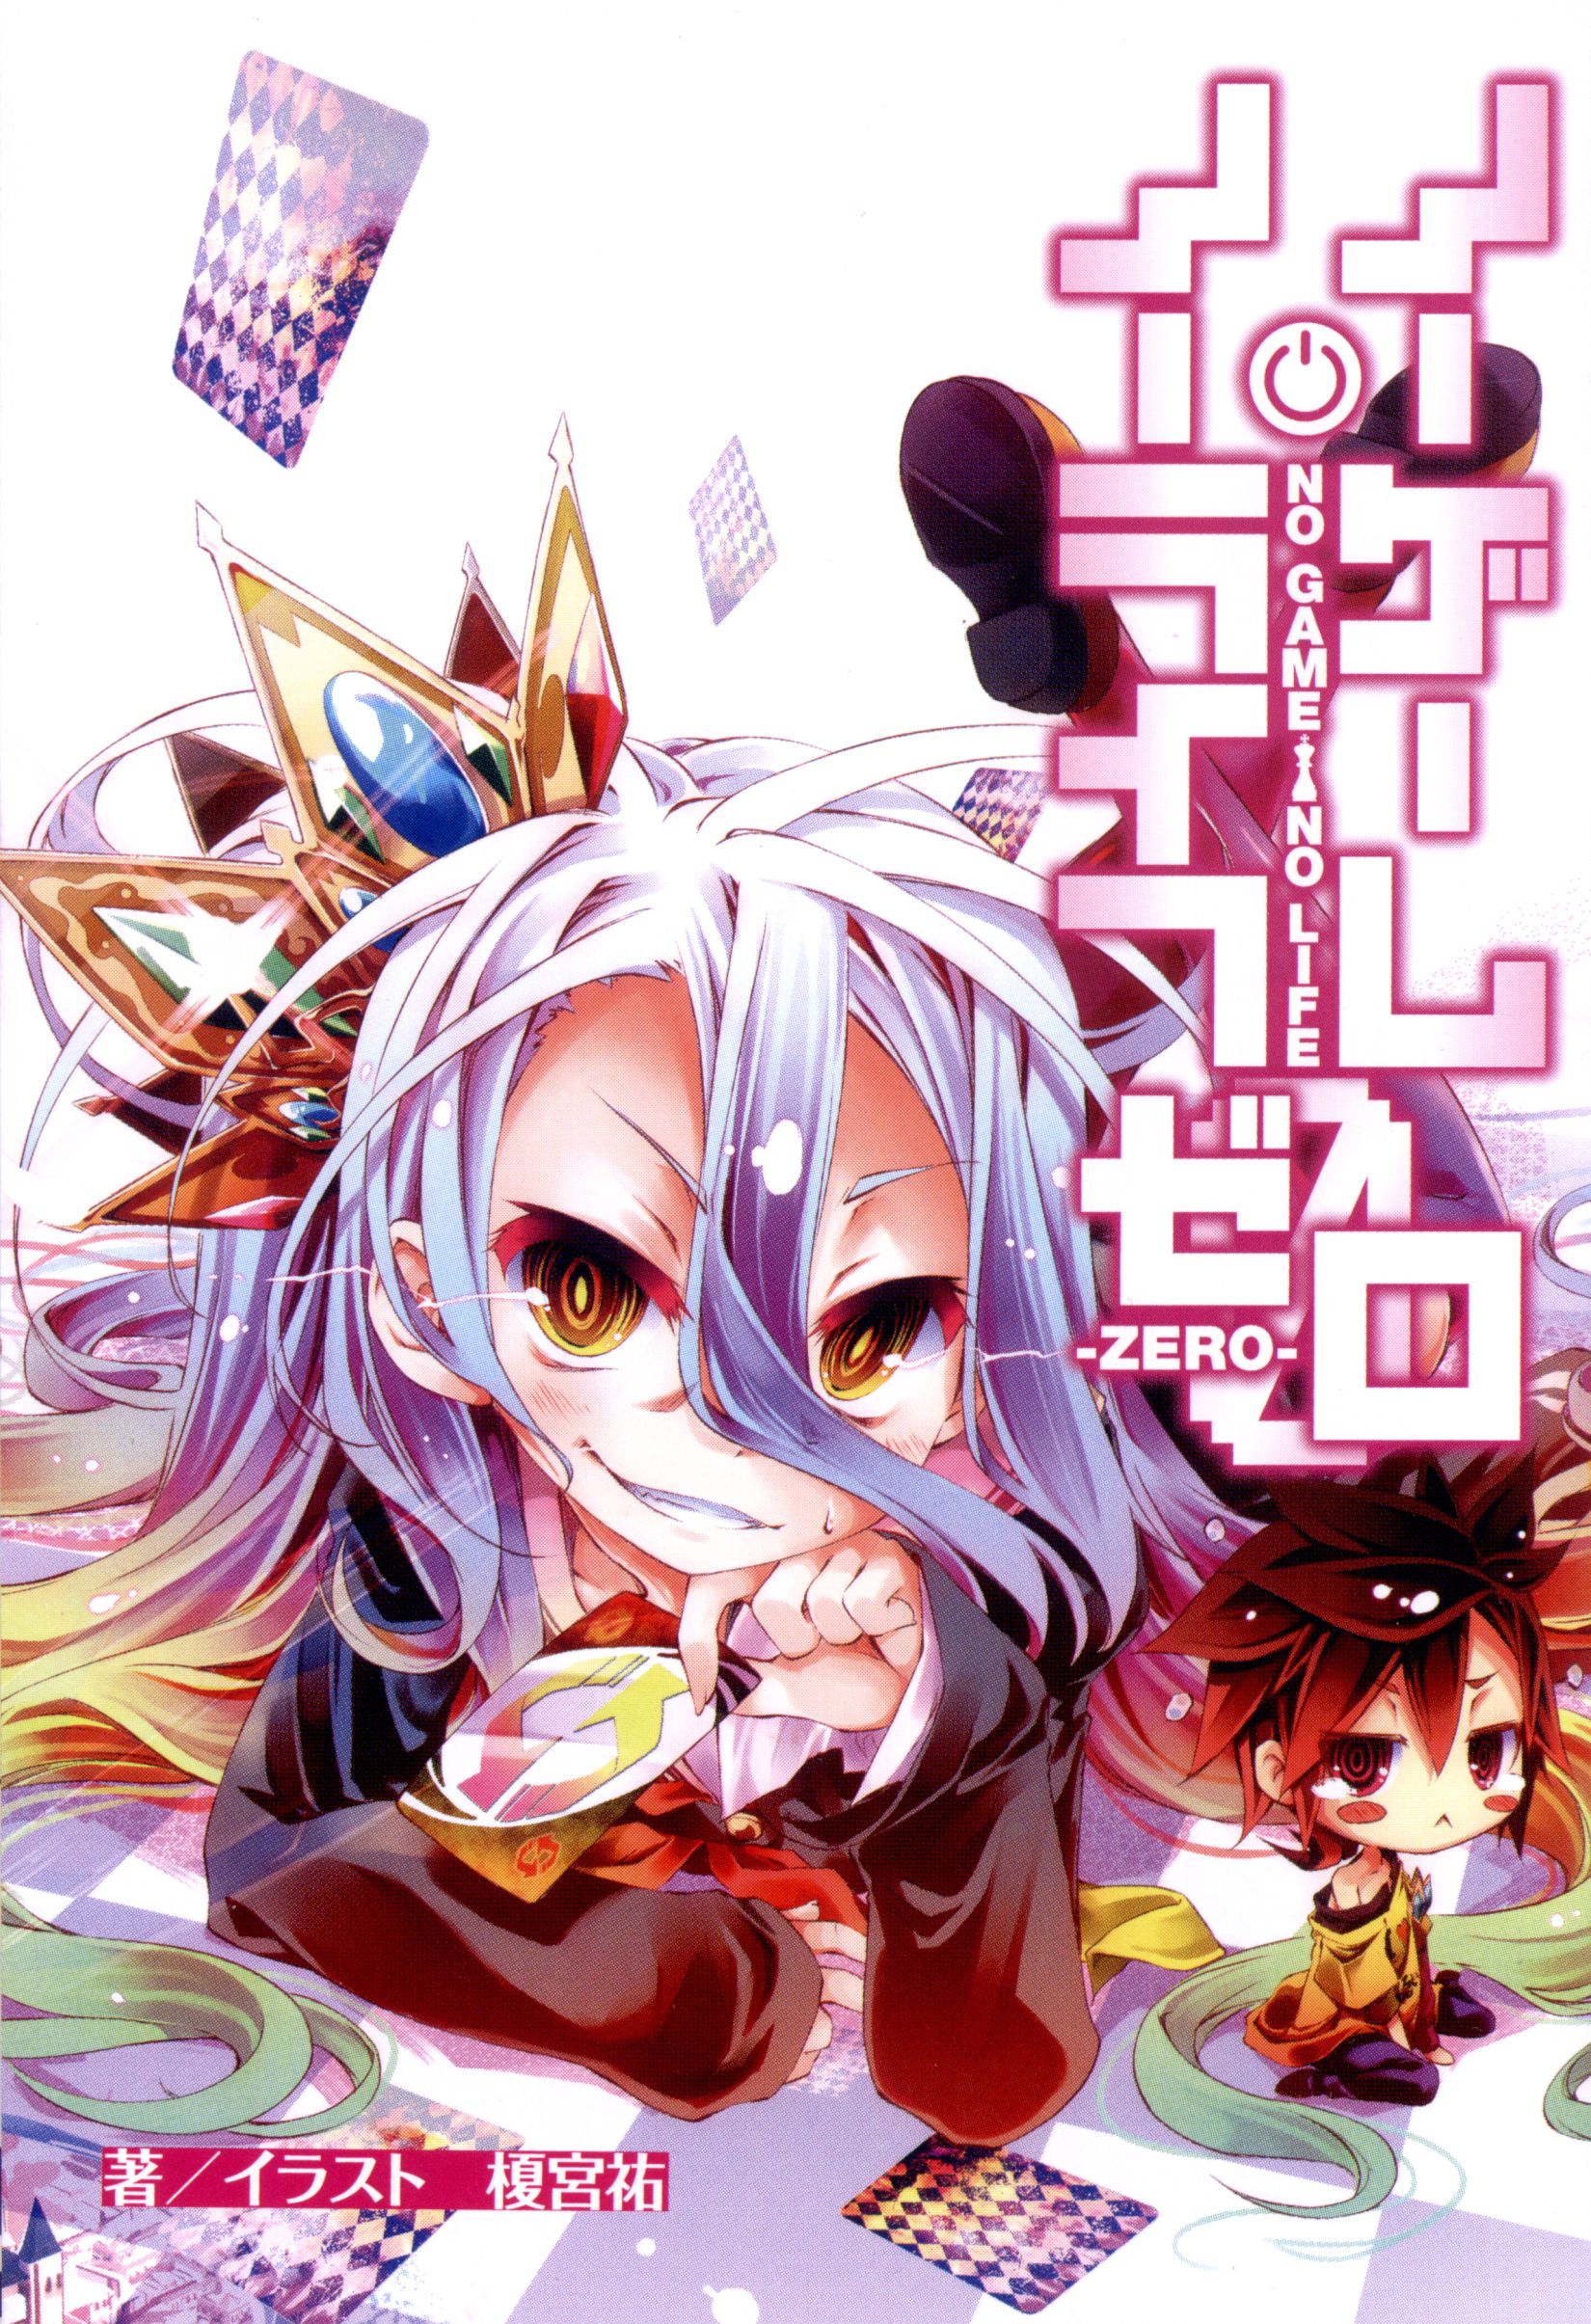 Additional Thoughts: My Experience Watching No Game No Life Zero